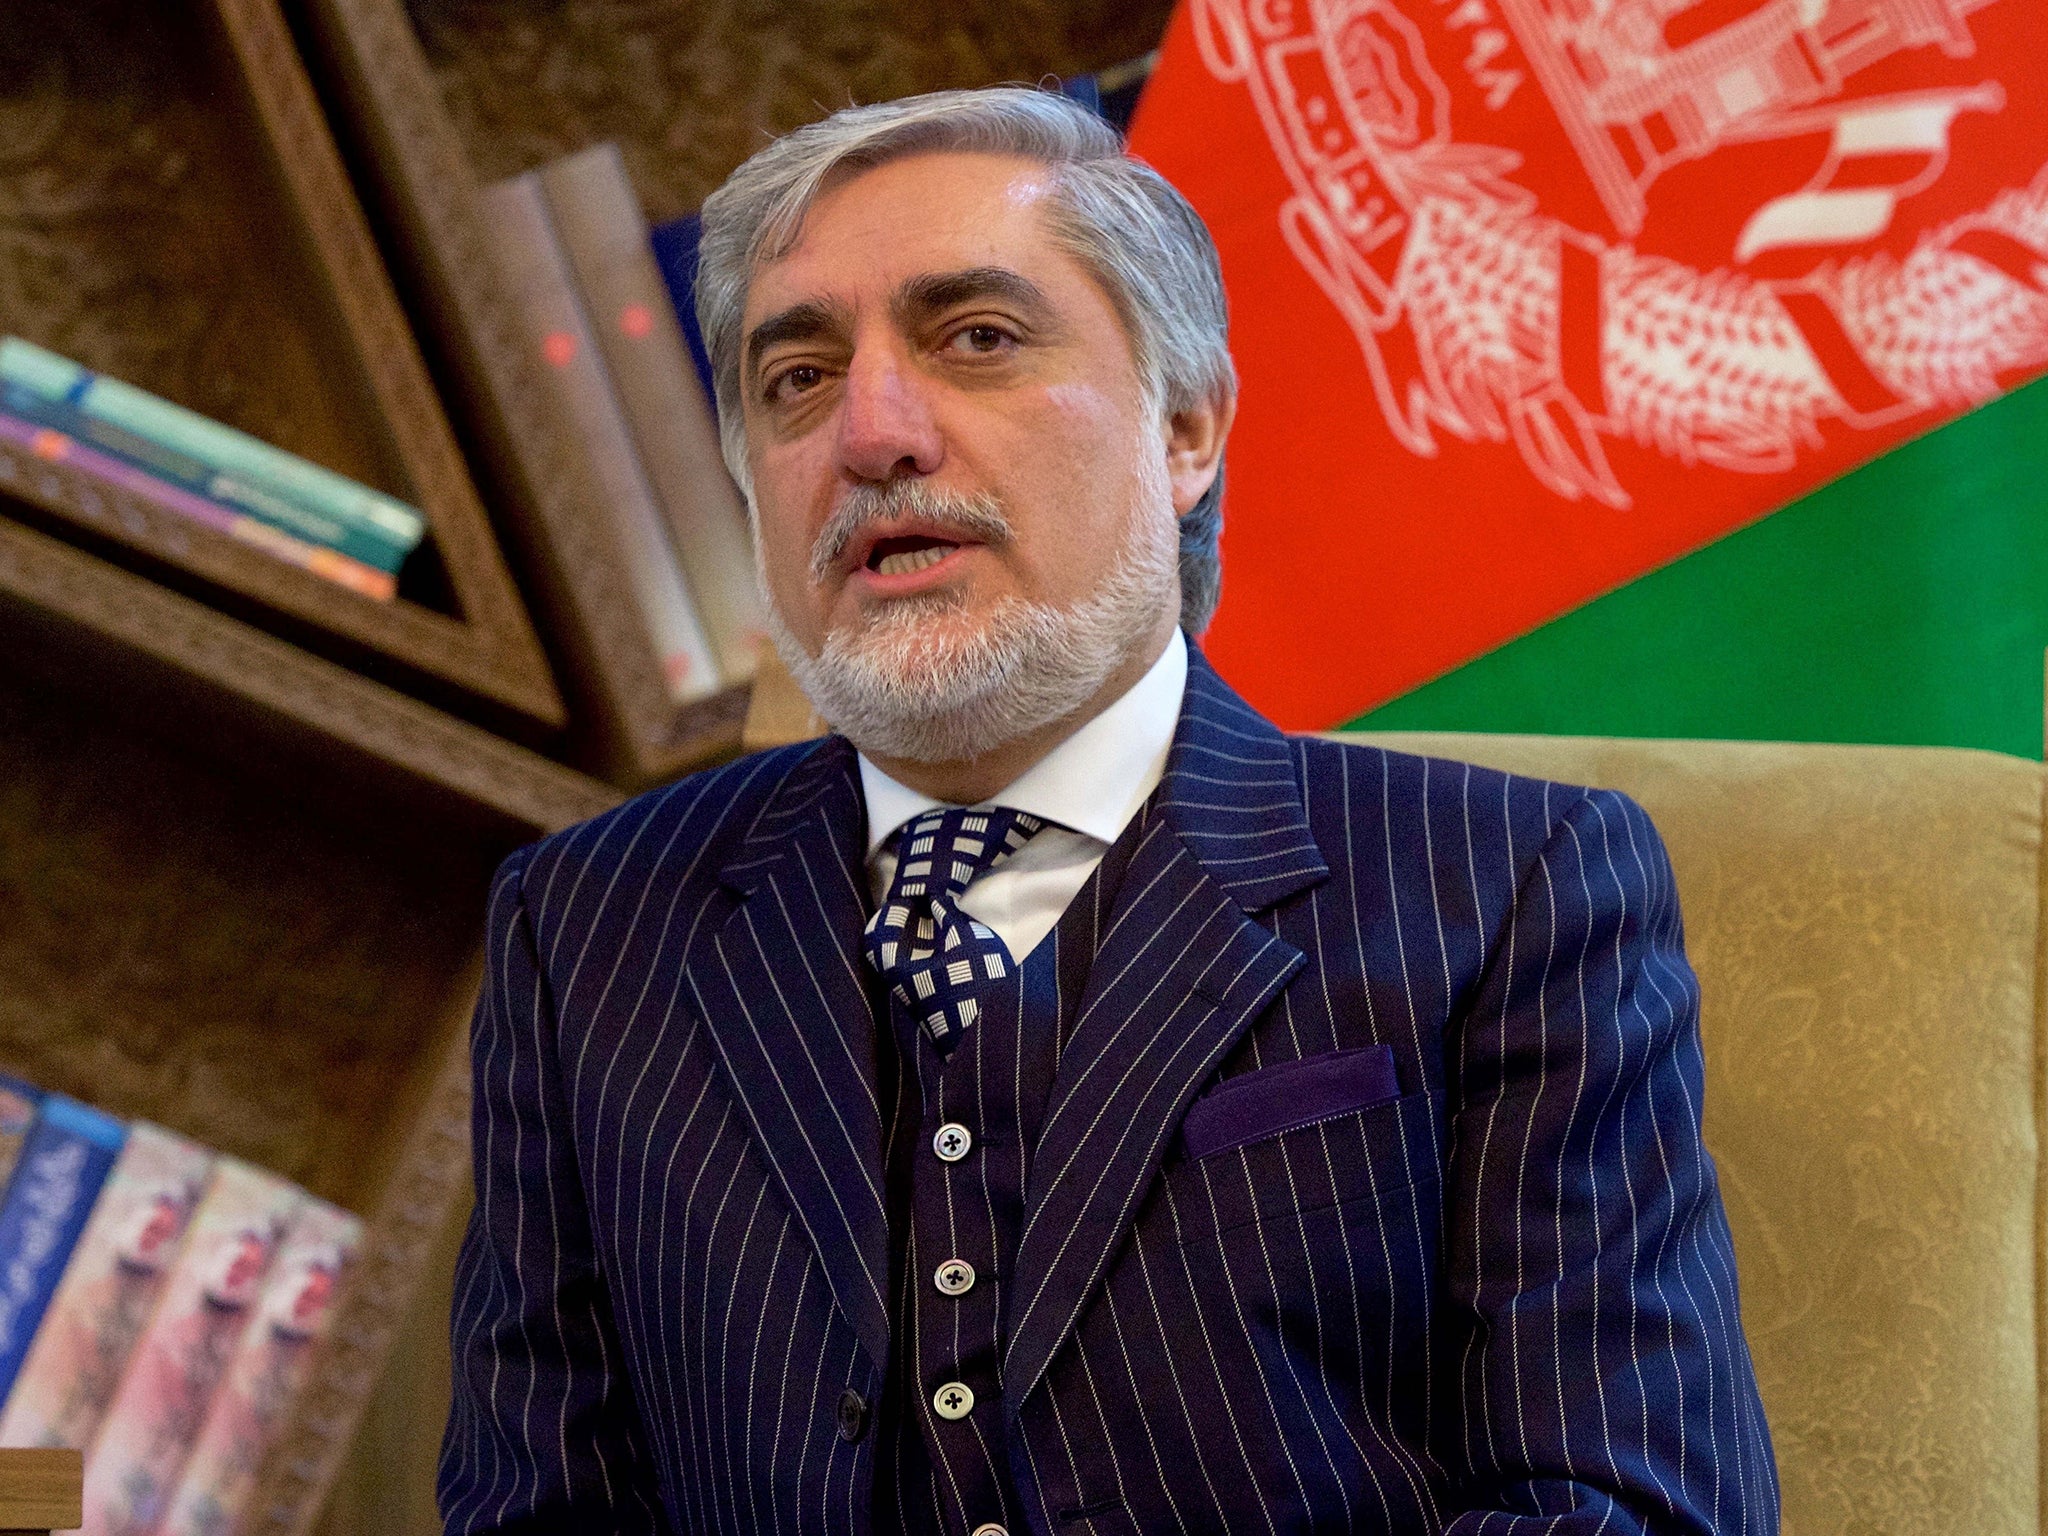 ‘Were the great sacrifices of the British forces made in vain? I don’t think so: they helped to prevent the whole region from slipping into chaos,’ said Abdullah Abdullah